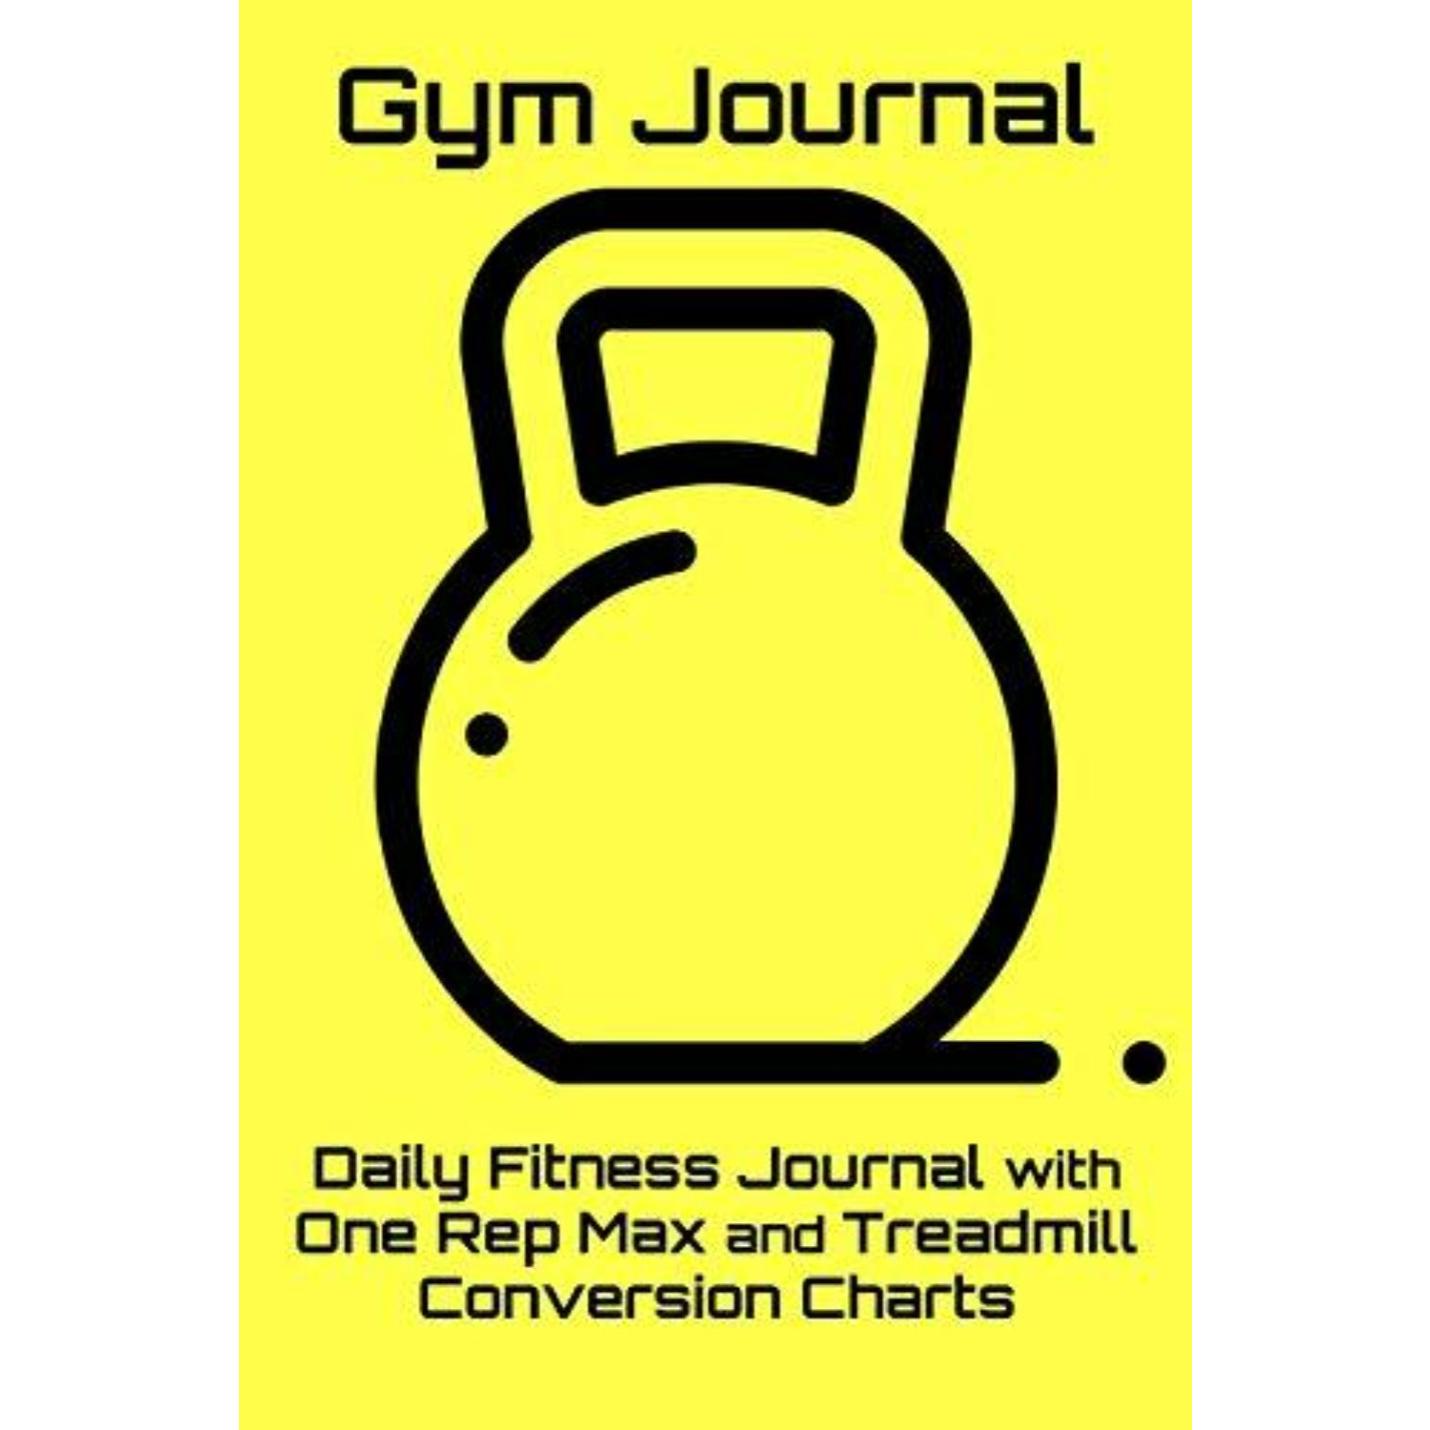 Gym Journal: Daily Fitness Journal with One Rep Max and Treadmill Conversion Charts (Yellow) - happygetfit.com